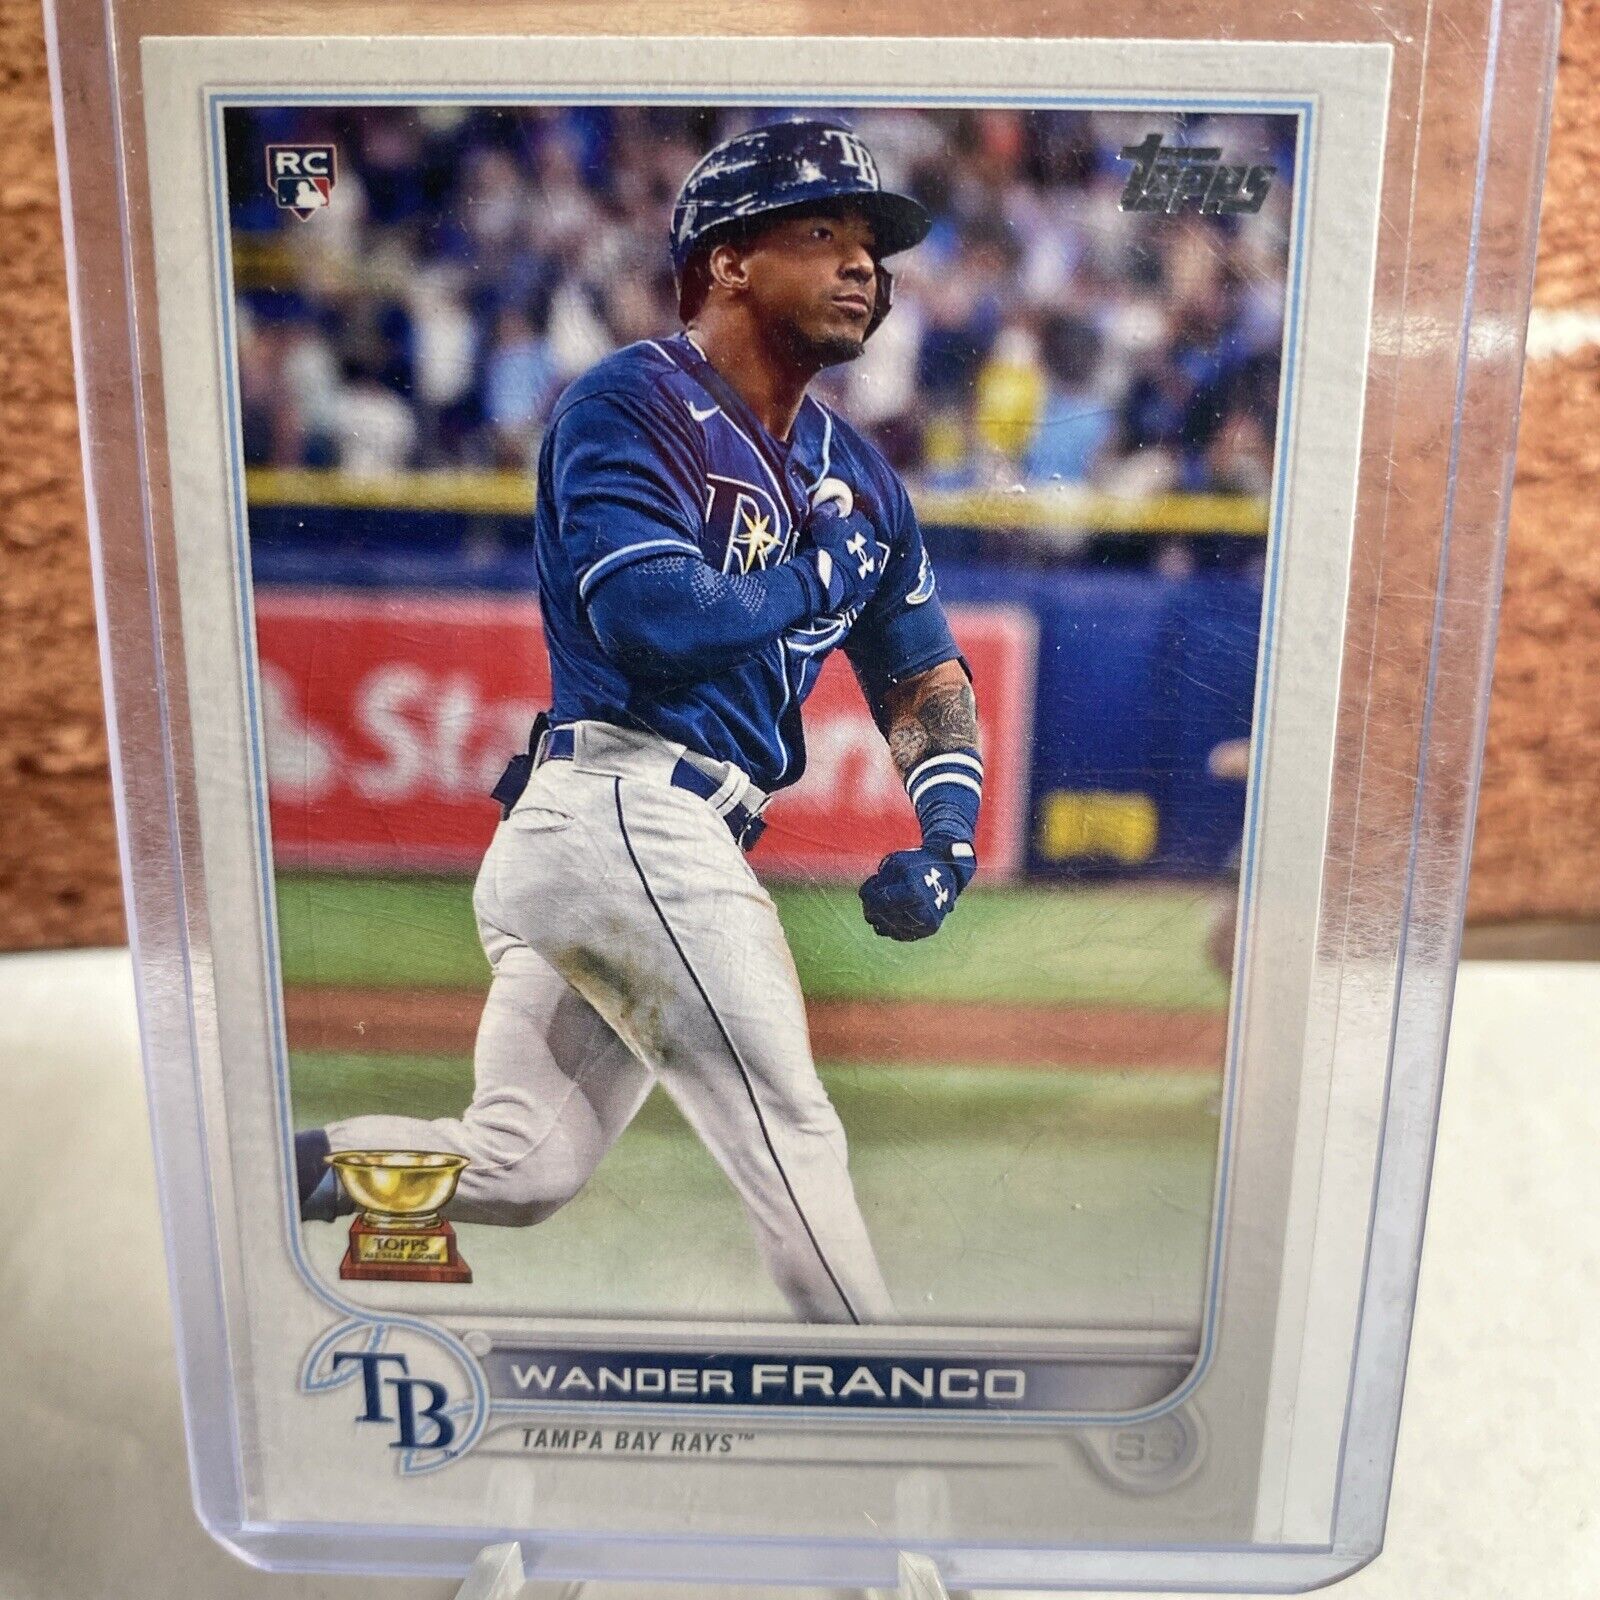 2022 Topps Series 1 #215 WANDER FRANCO Flagship Rookie Card RC Tampa Bay Rays